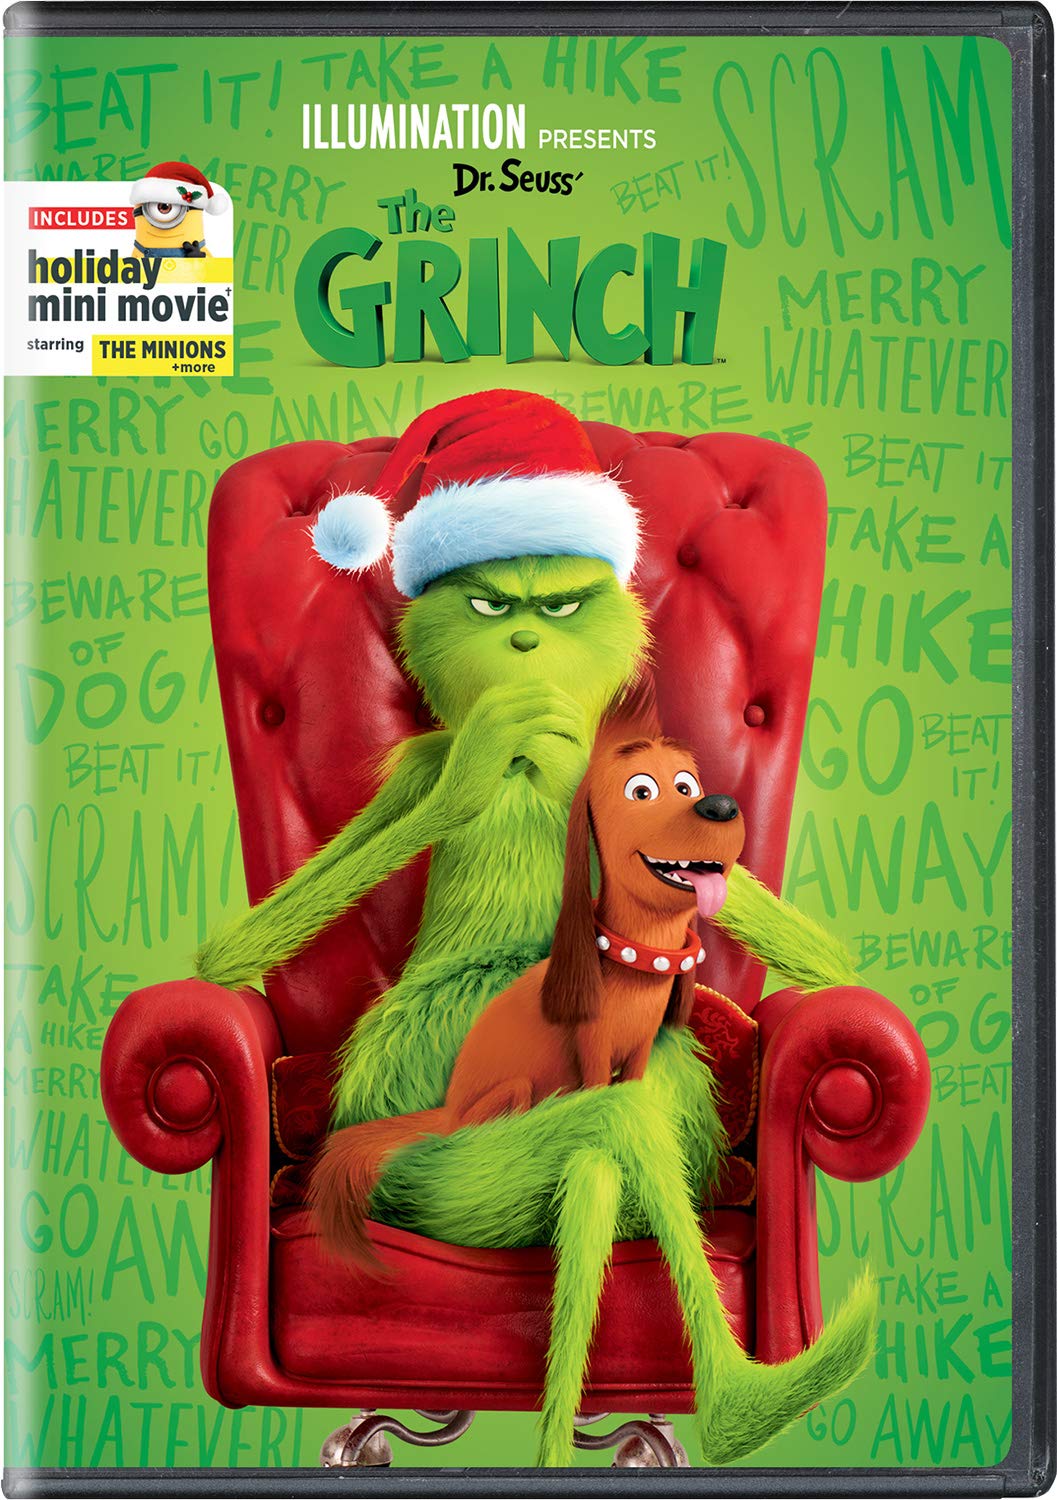 The Grinch DVD cover